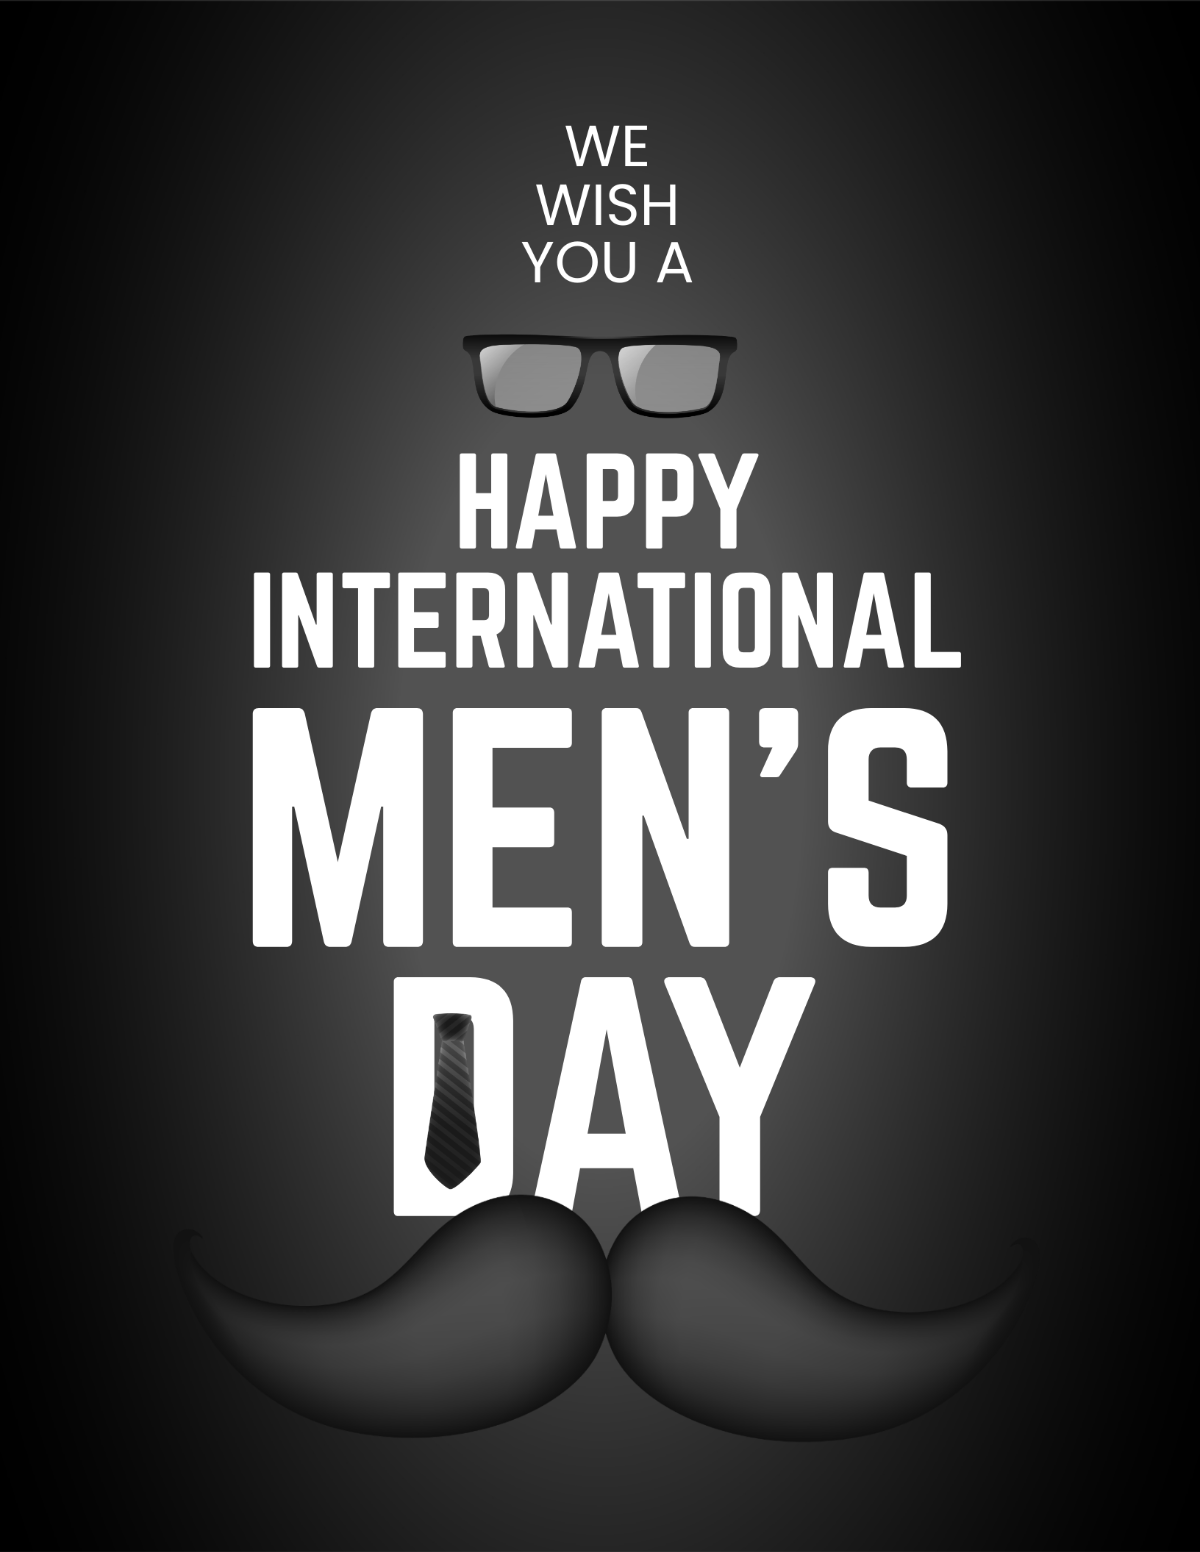 Free International Mens Day Wishes Flyer Template